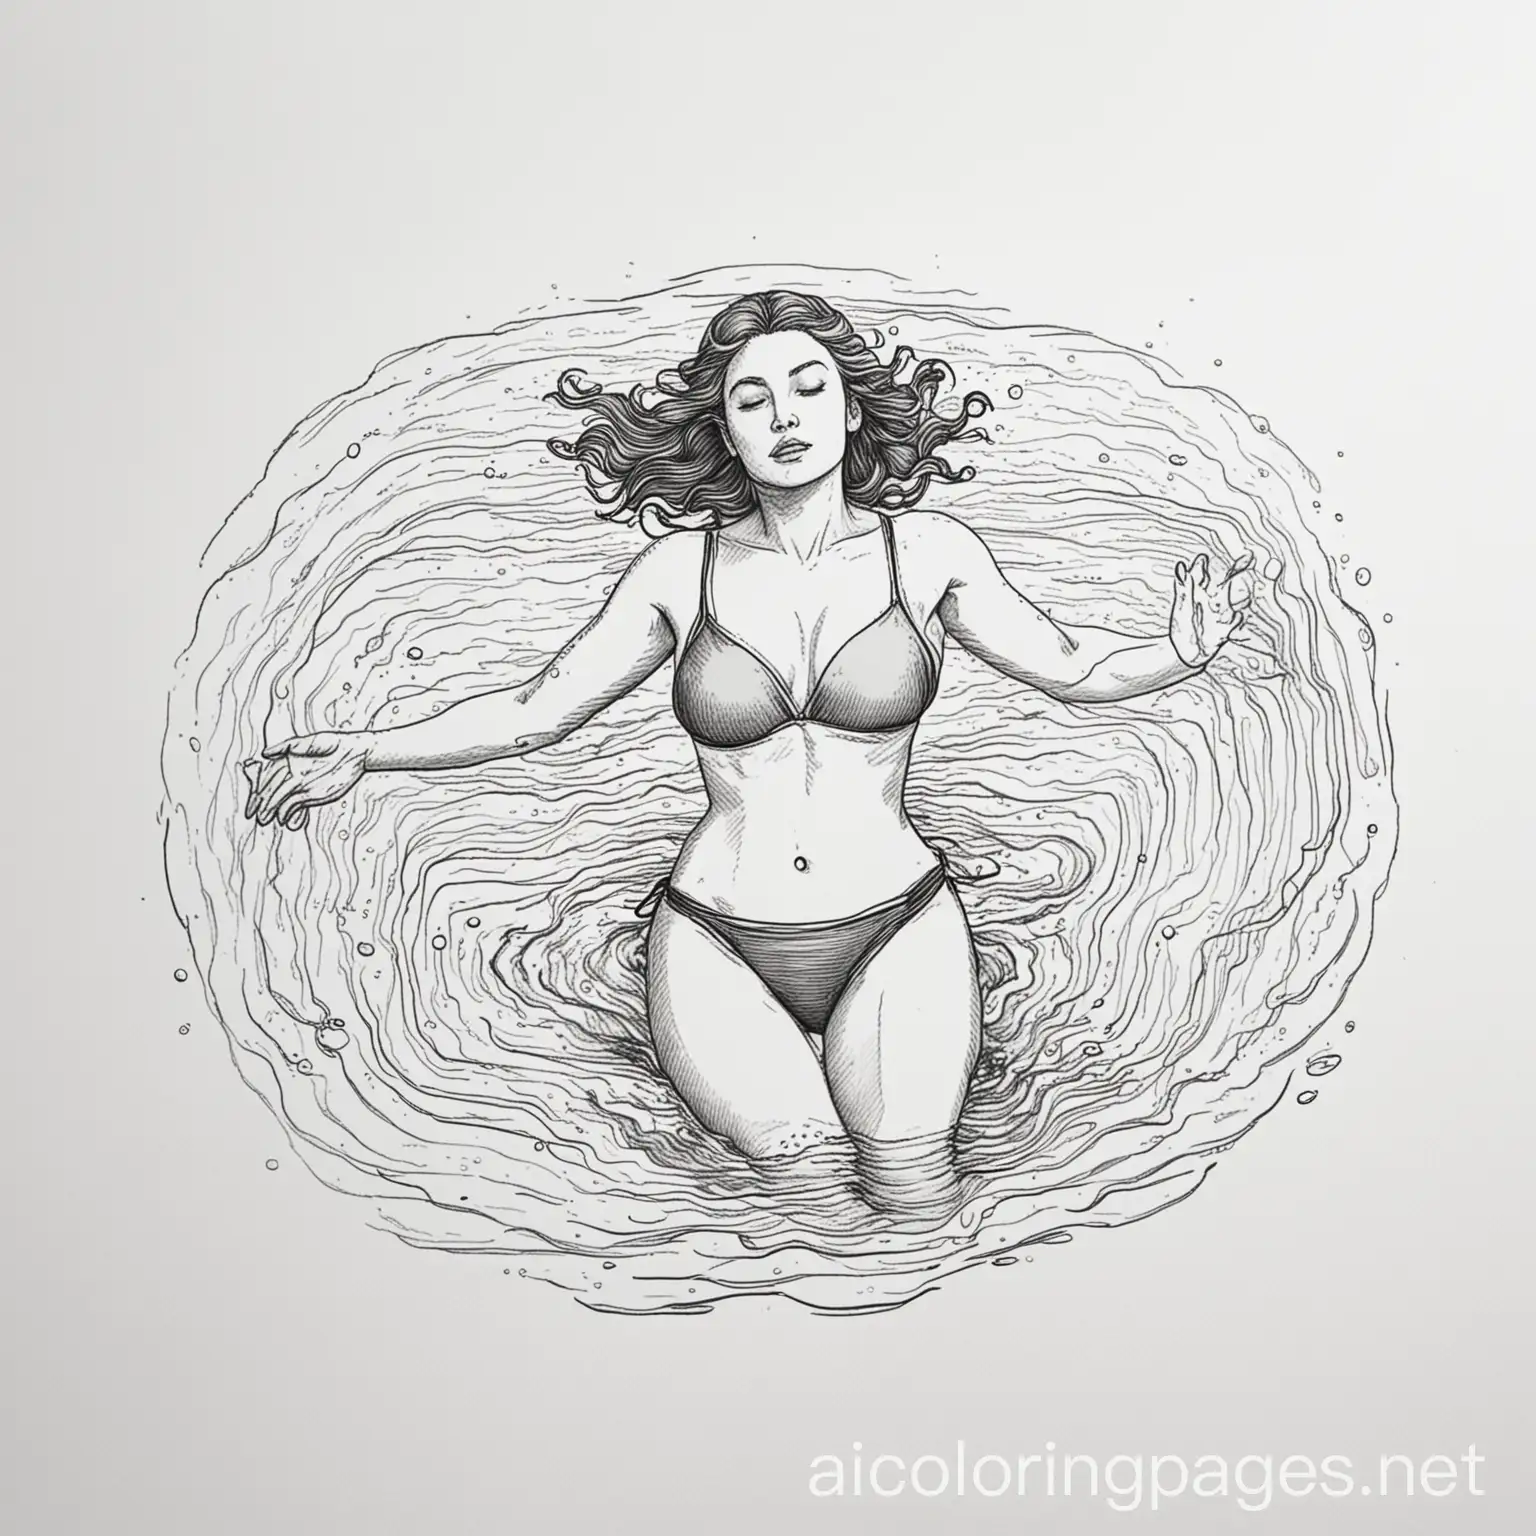 Woman-Swimming-in-Tranquil-Waters-Coloring-Page